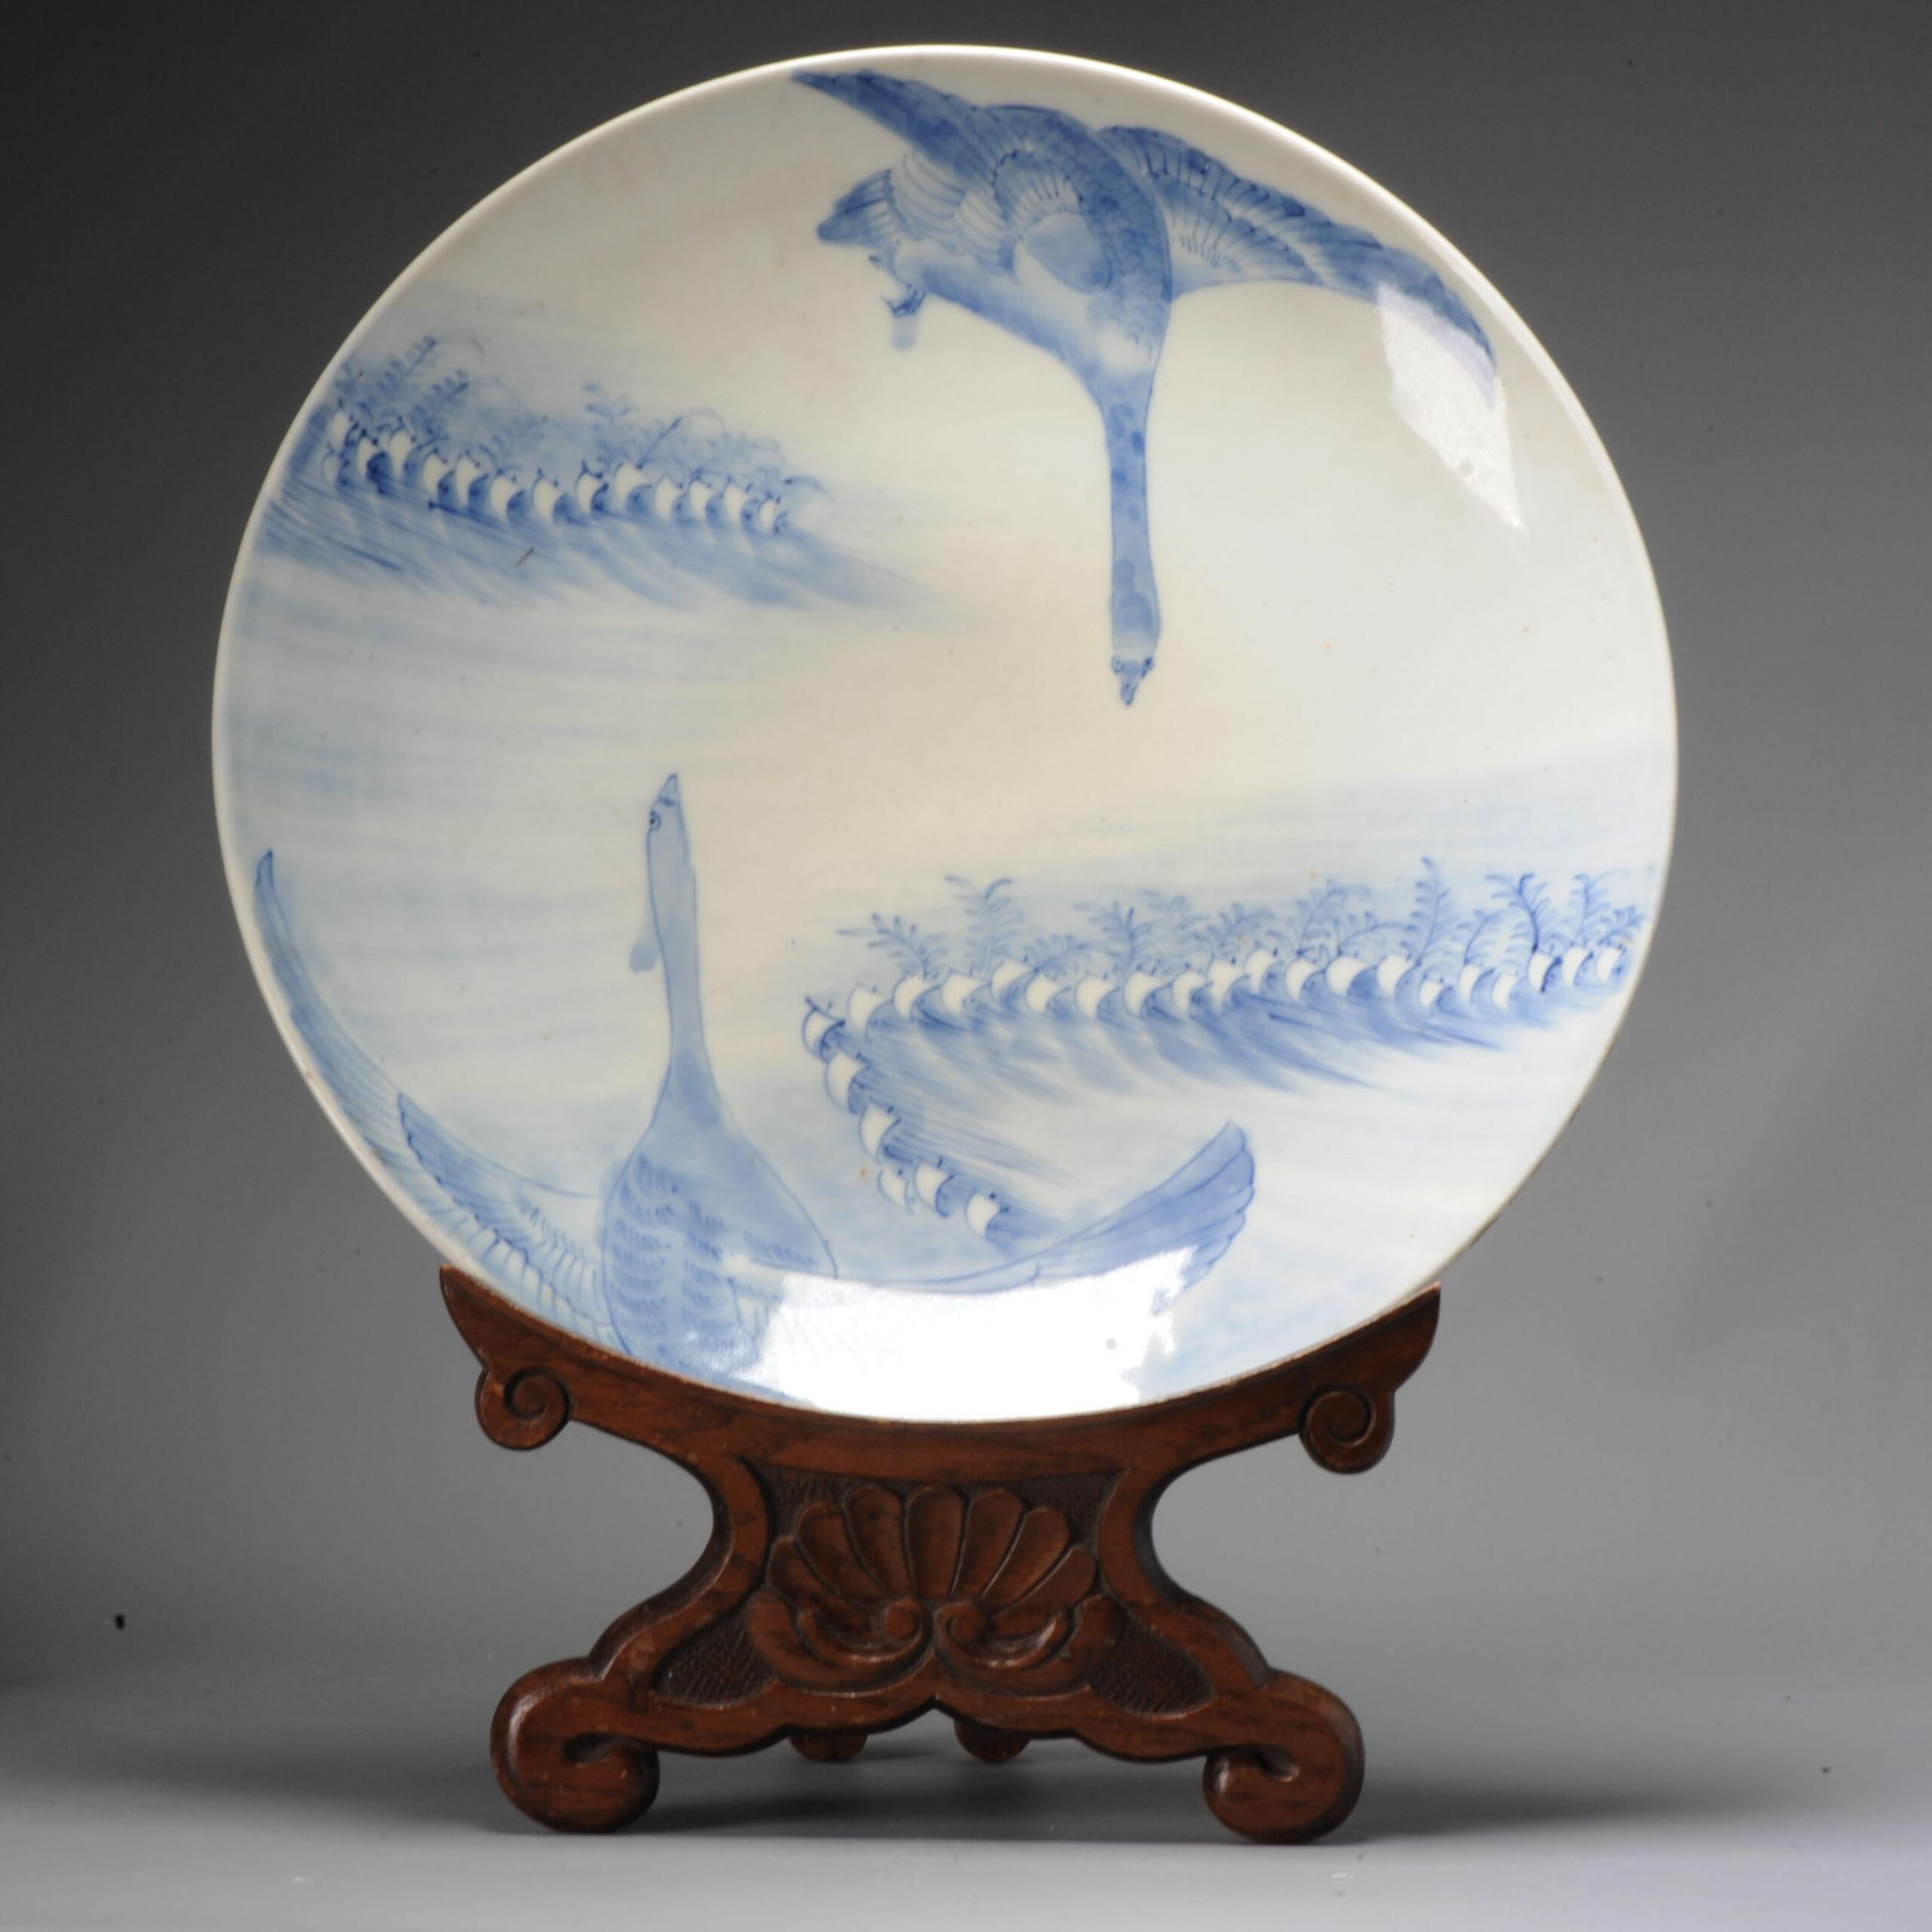 Ming Antique Meiji Period 19 / 20C Japanese Porcelain Swan/Geese Charger Arita For Sale